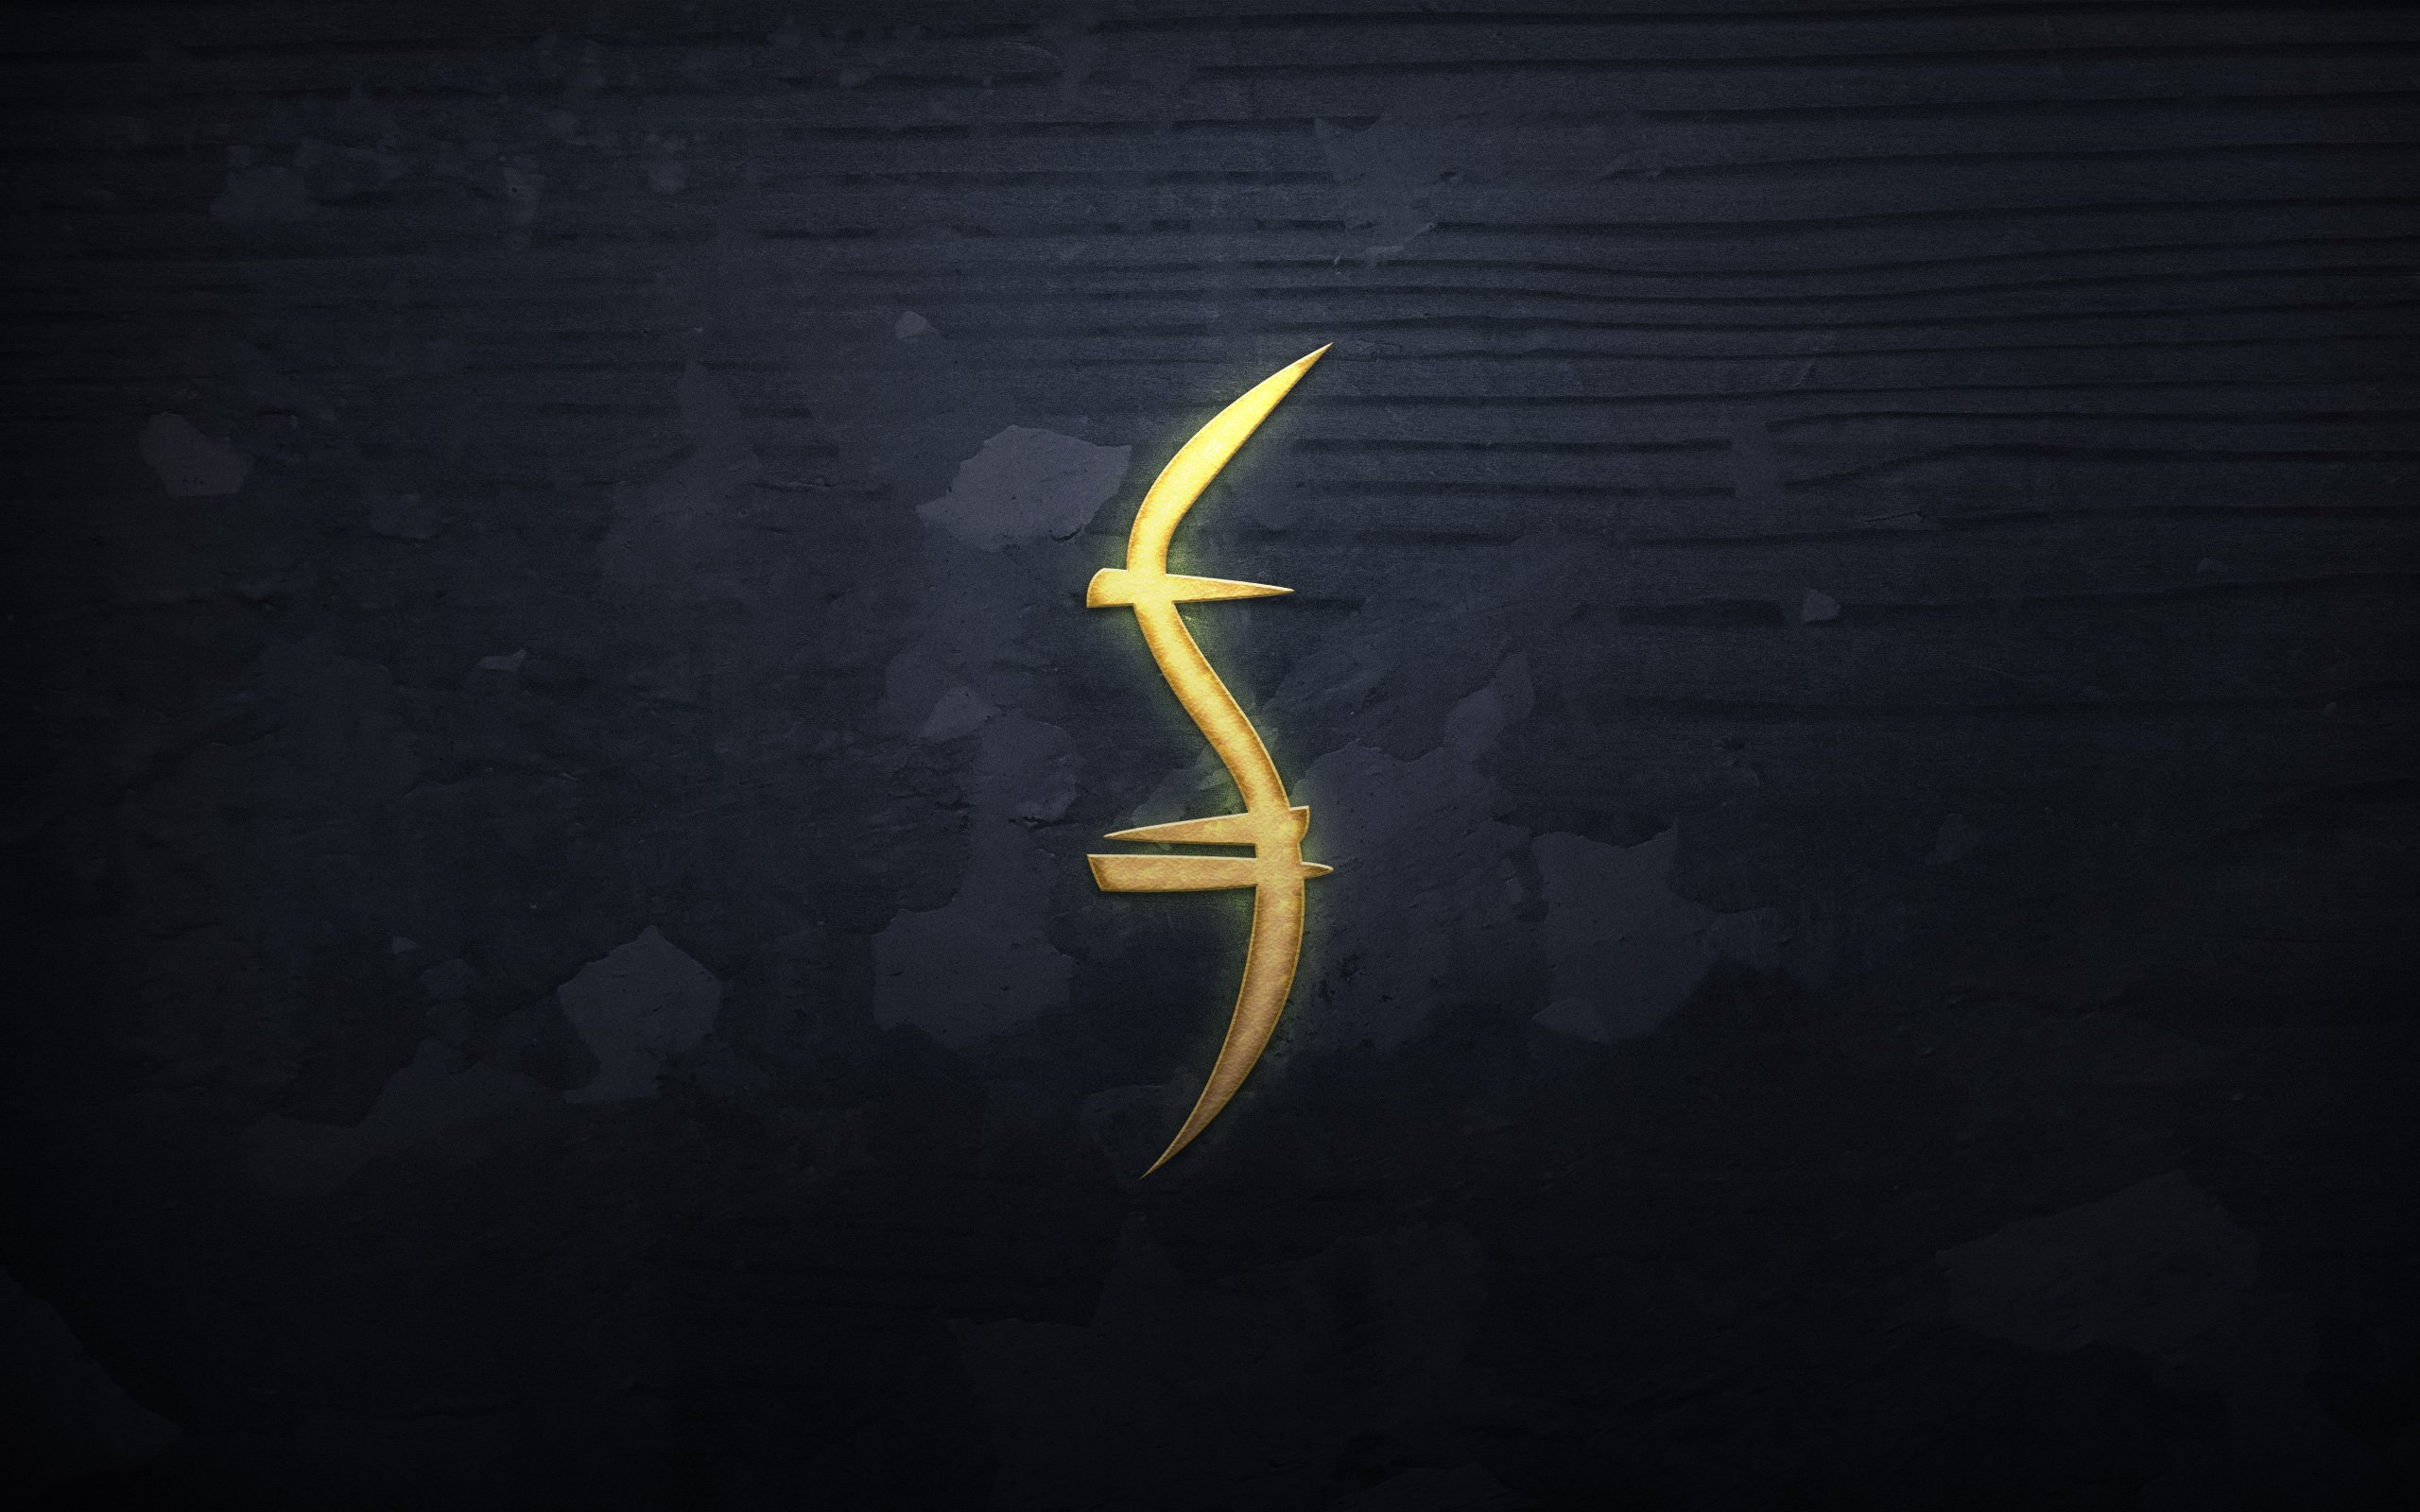 The symbol from the Heroes TV series Yellow on a black somewhat